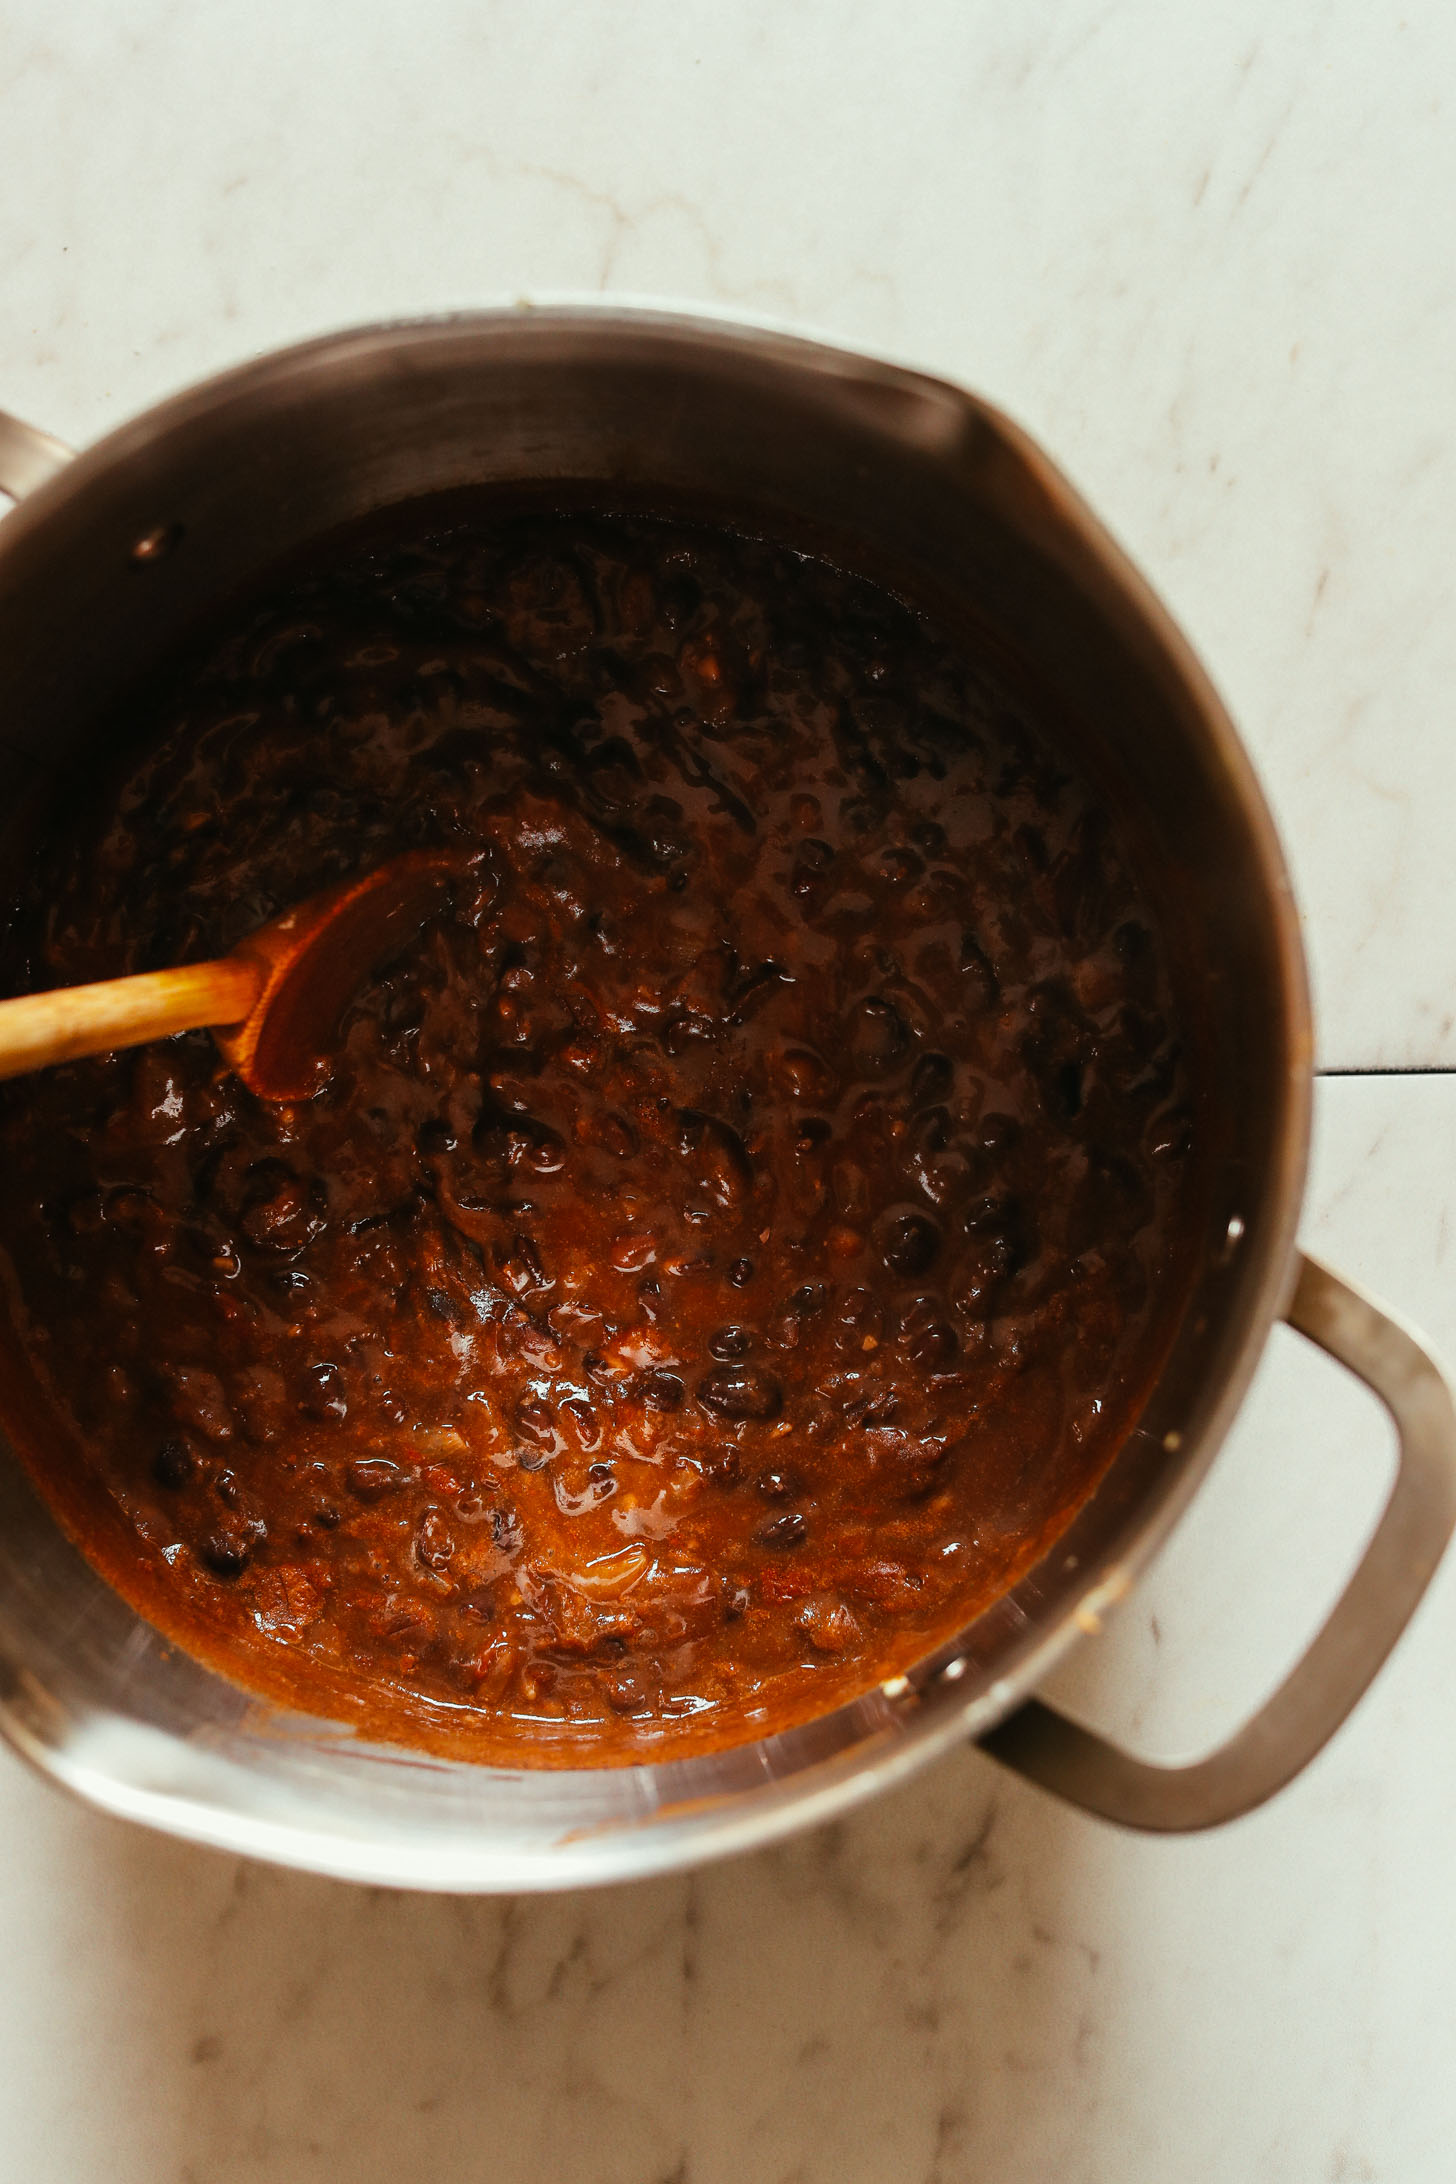 Overhead image of pot with black bean soup and a wooden spoon stirring the ingredients